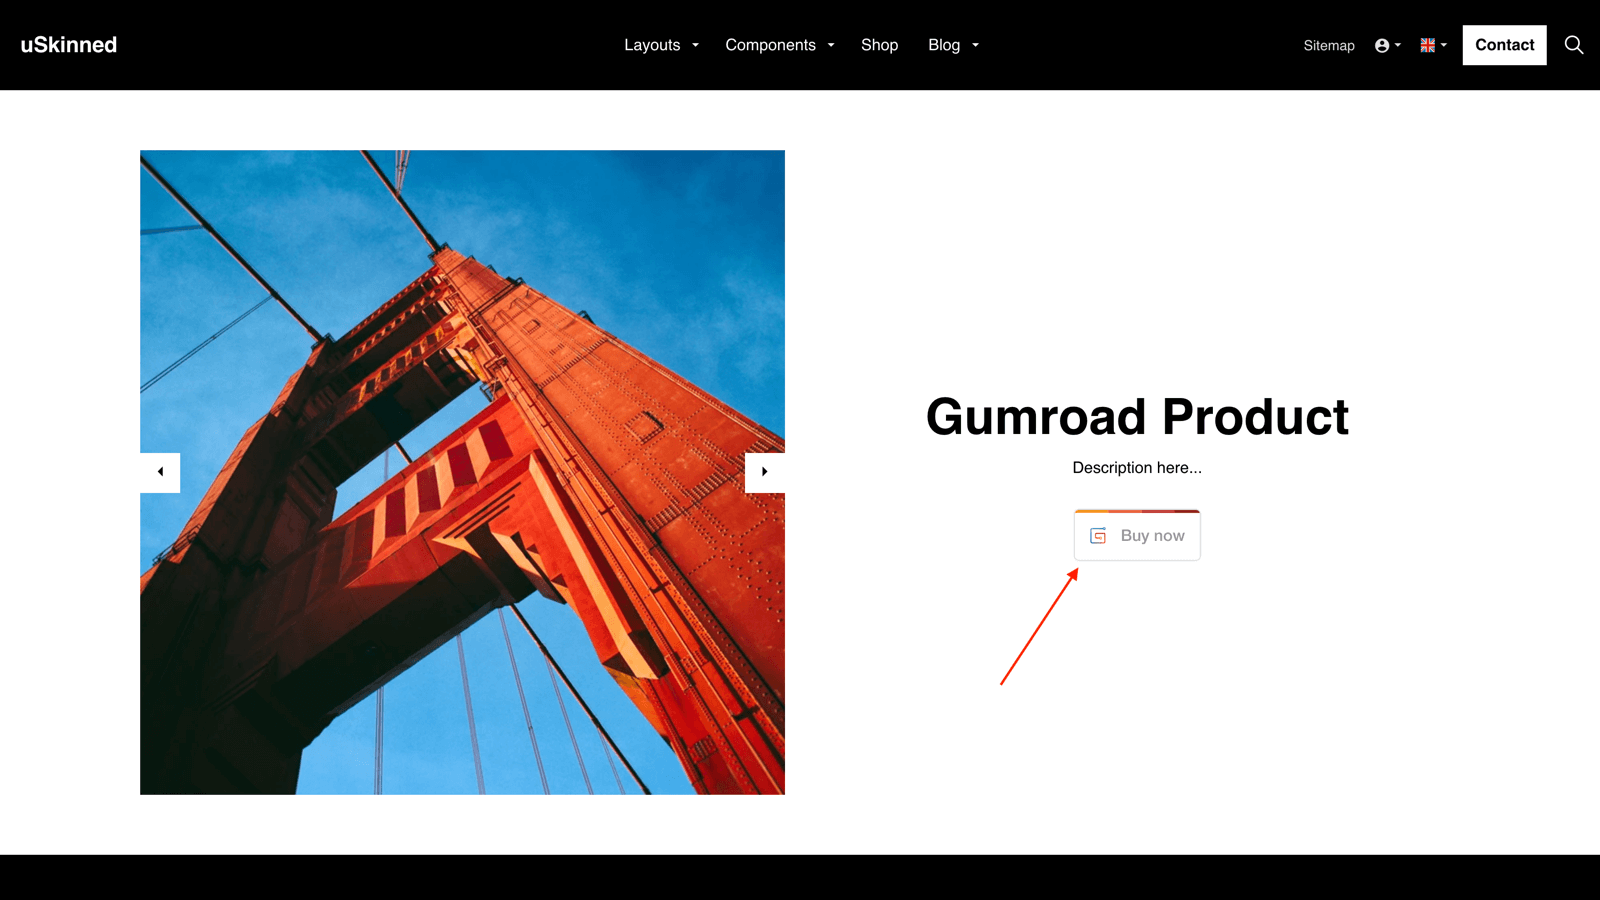 View the Gumroad product on the frontend.